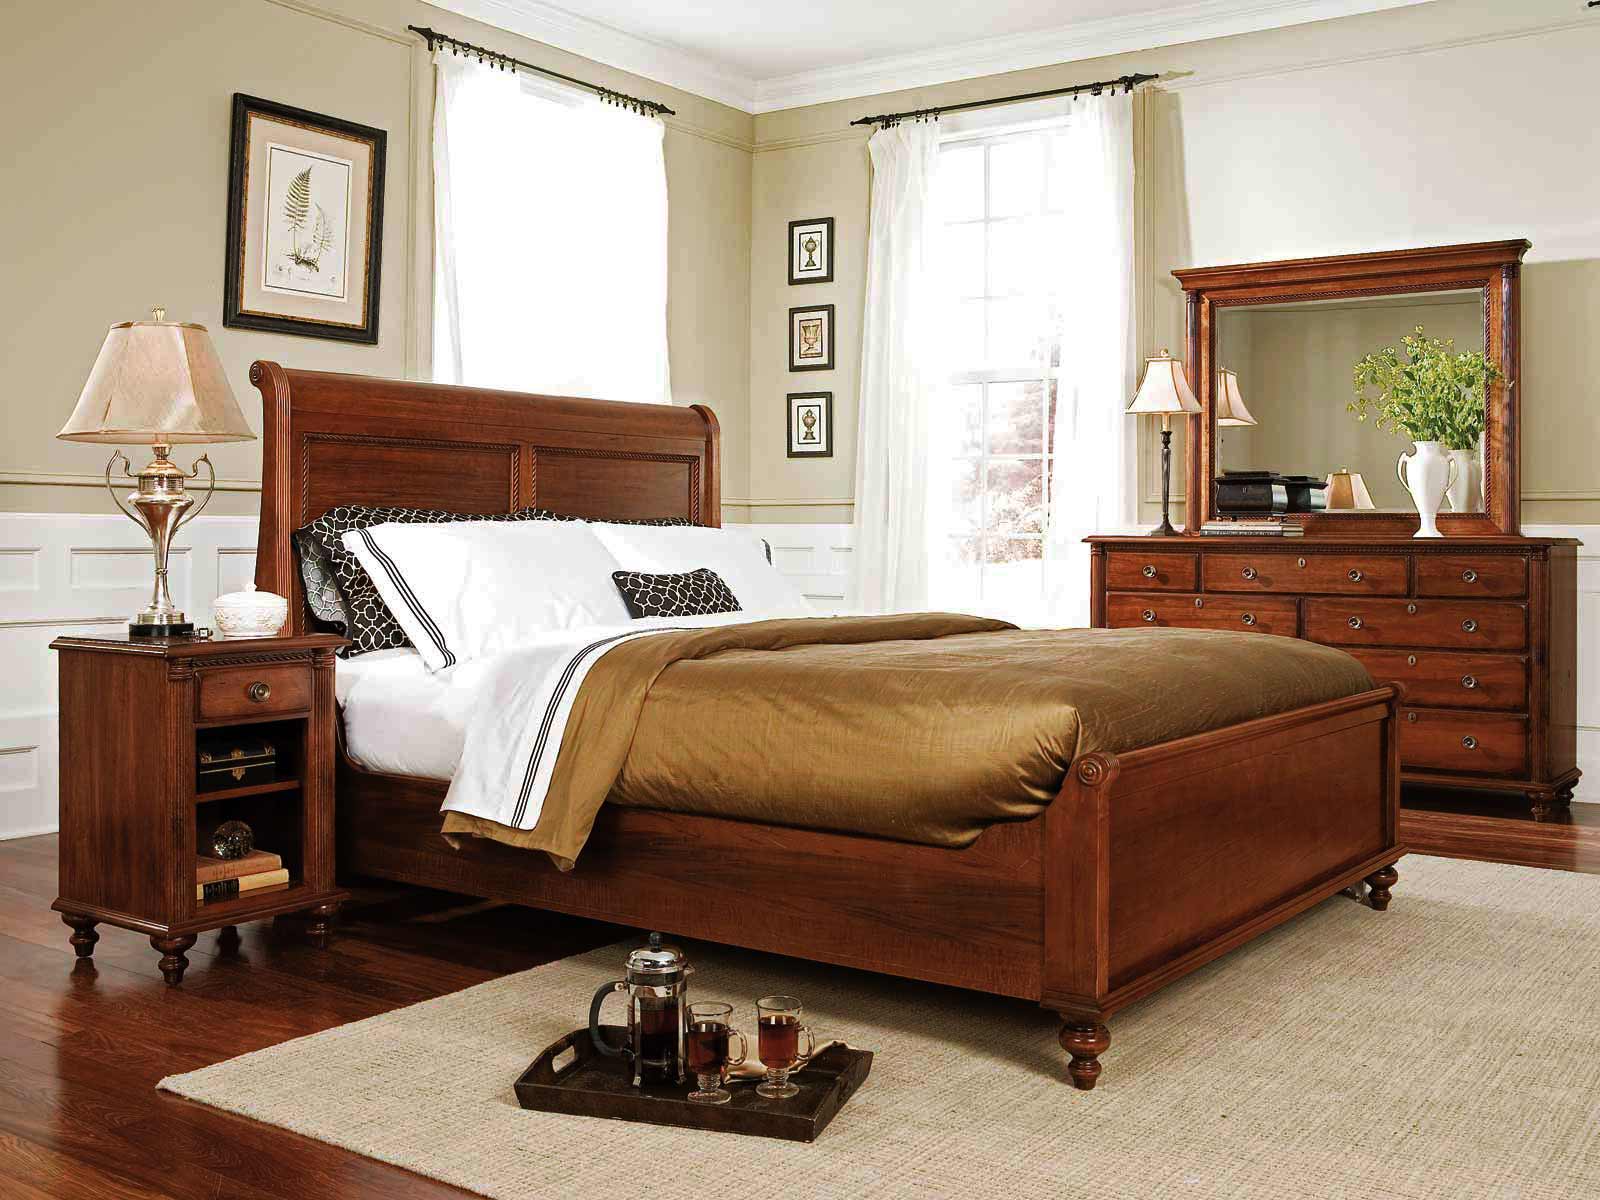 Durham Furniture Savile Row Cal King Sleigh Bed W Low Footboard In Victorian Mahogany 980 147bck Vicm